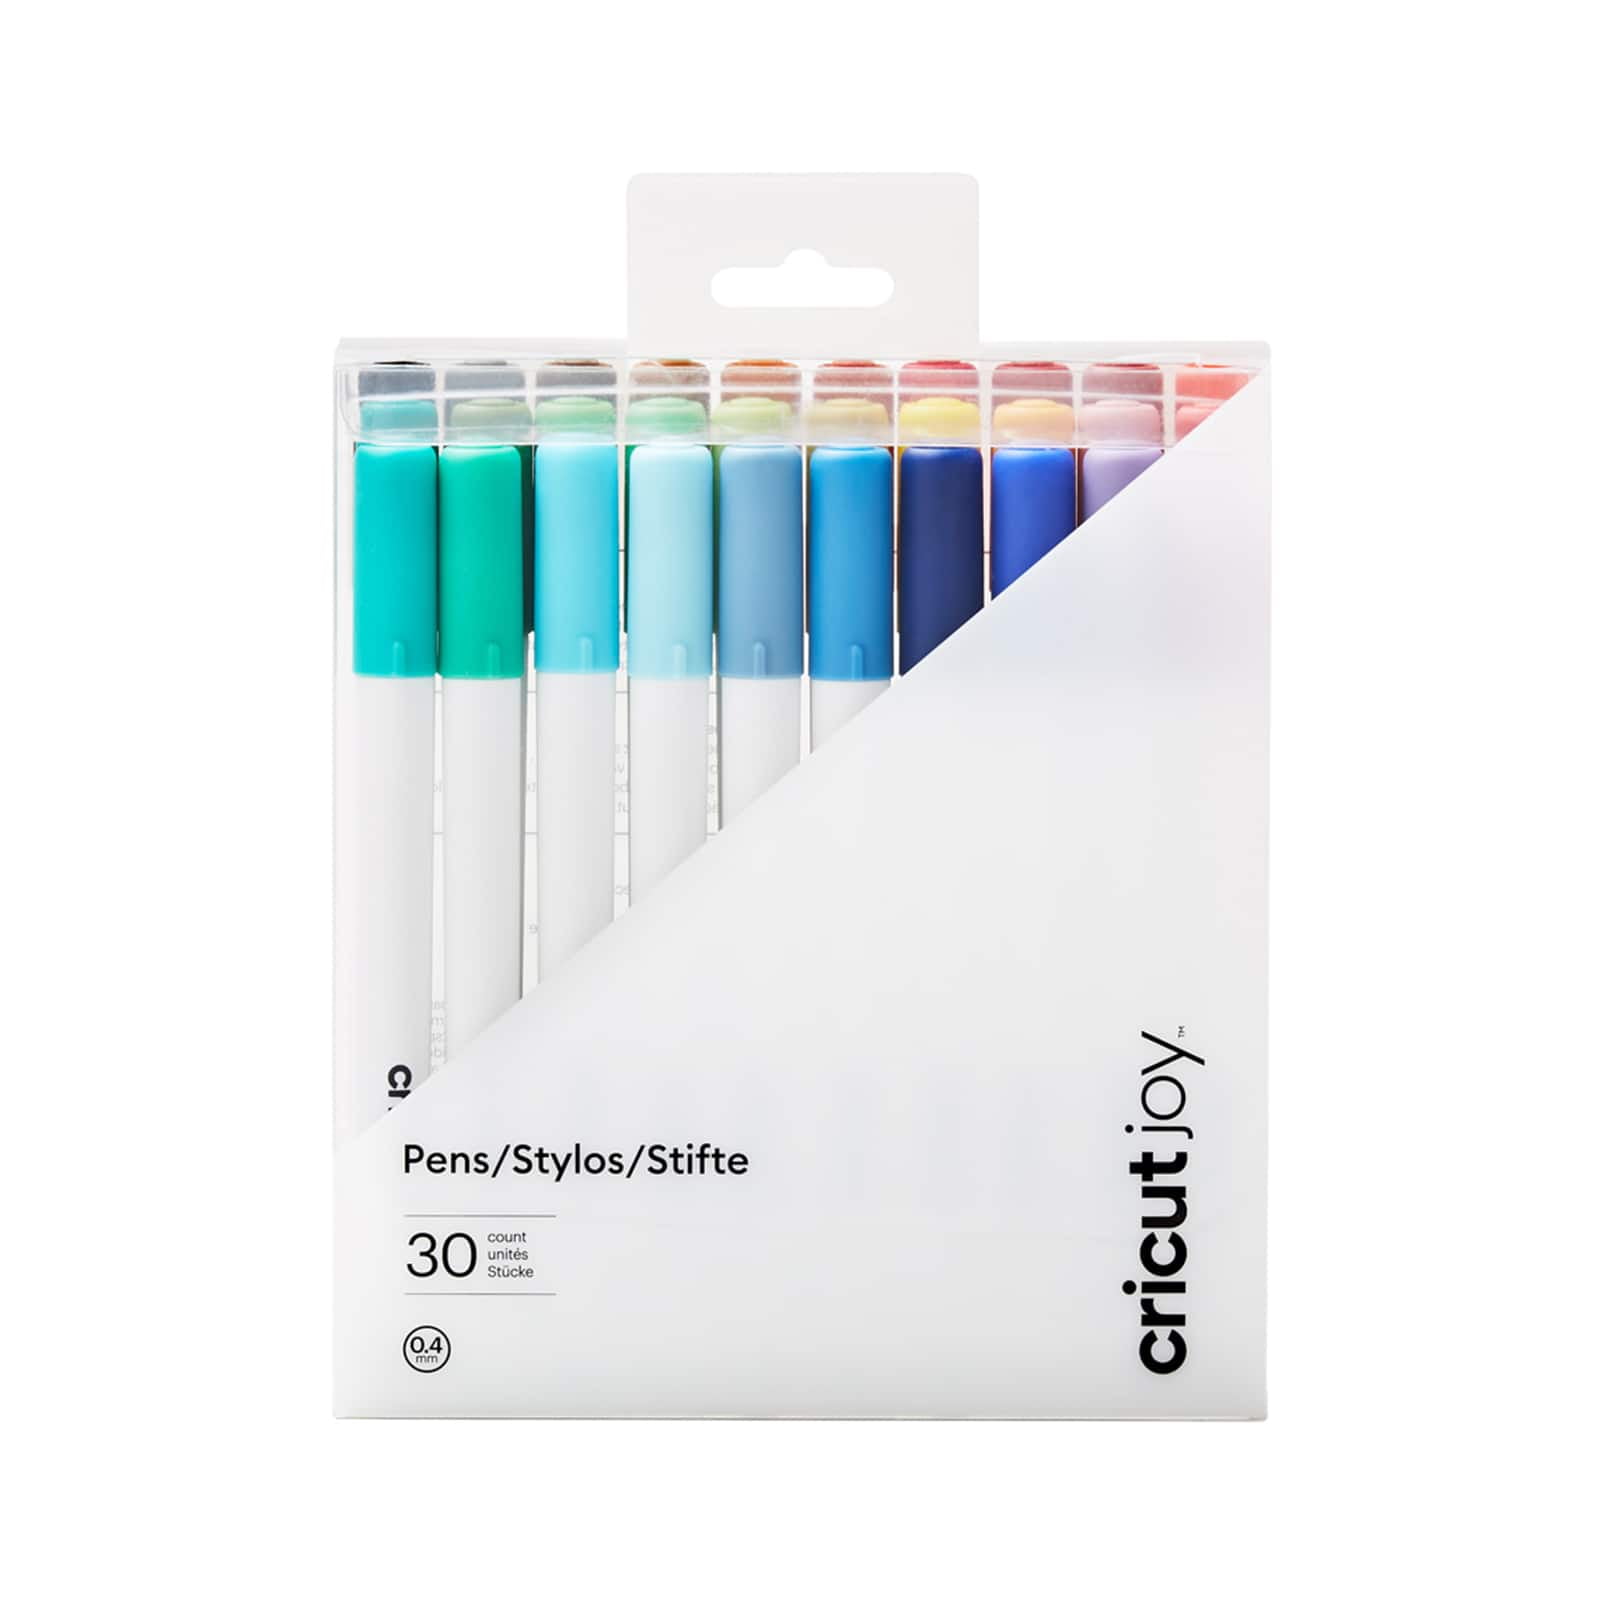  REALIKE Dual Tip Pens for Cricut Joy Accessories Tools Dual  Tip Marker Pens Set of 36 Pack Assorted Writing Drawing Fine Point Pen  Compatible with Cricut Joy Cutting Machine (0.4